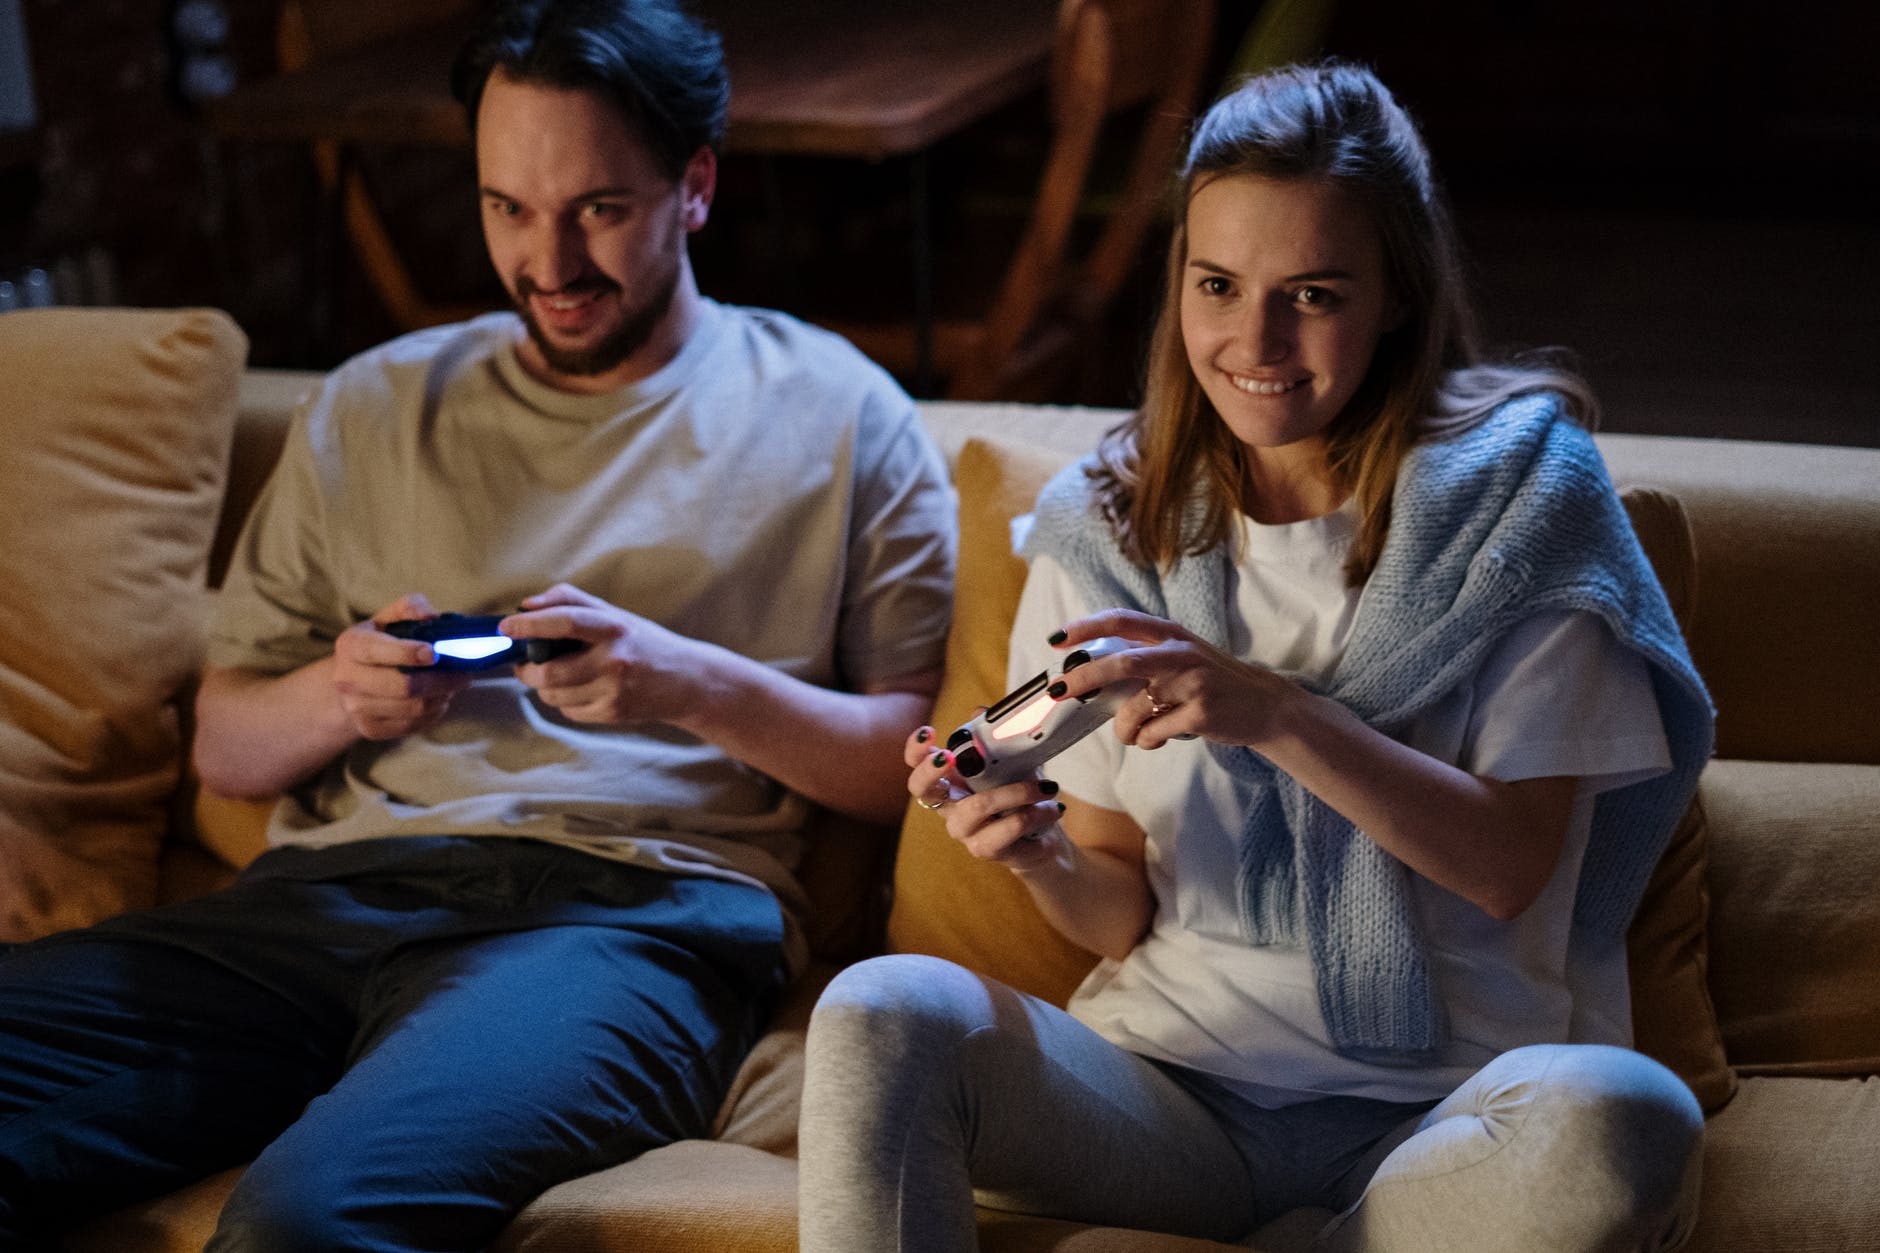 Couple on couch gaming